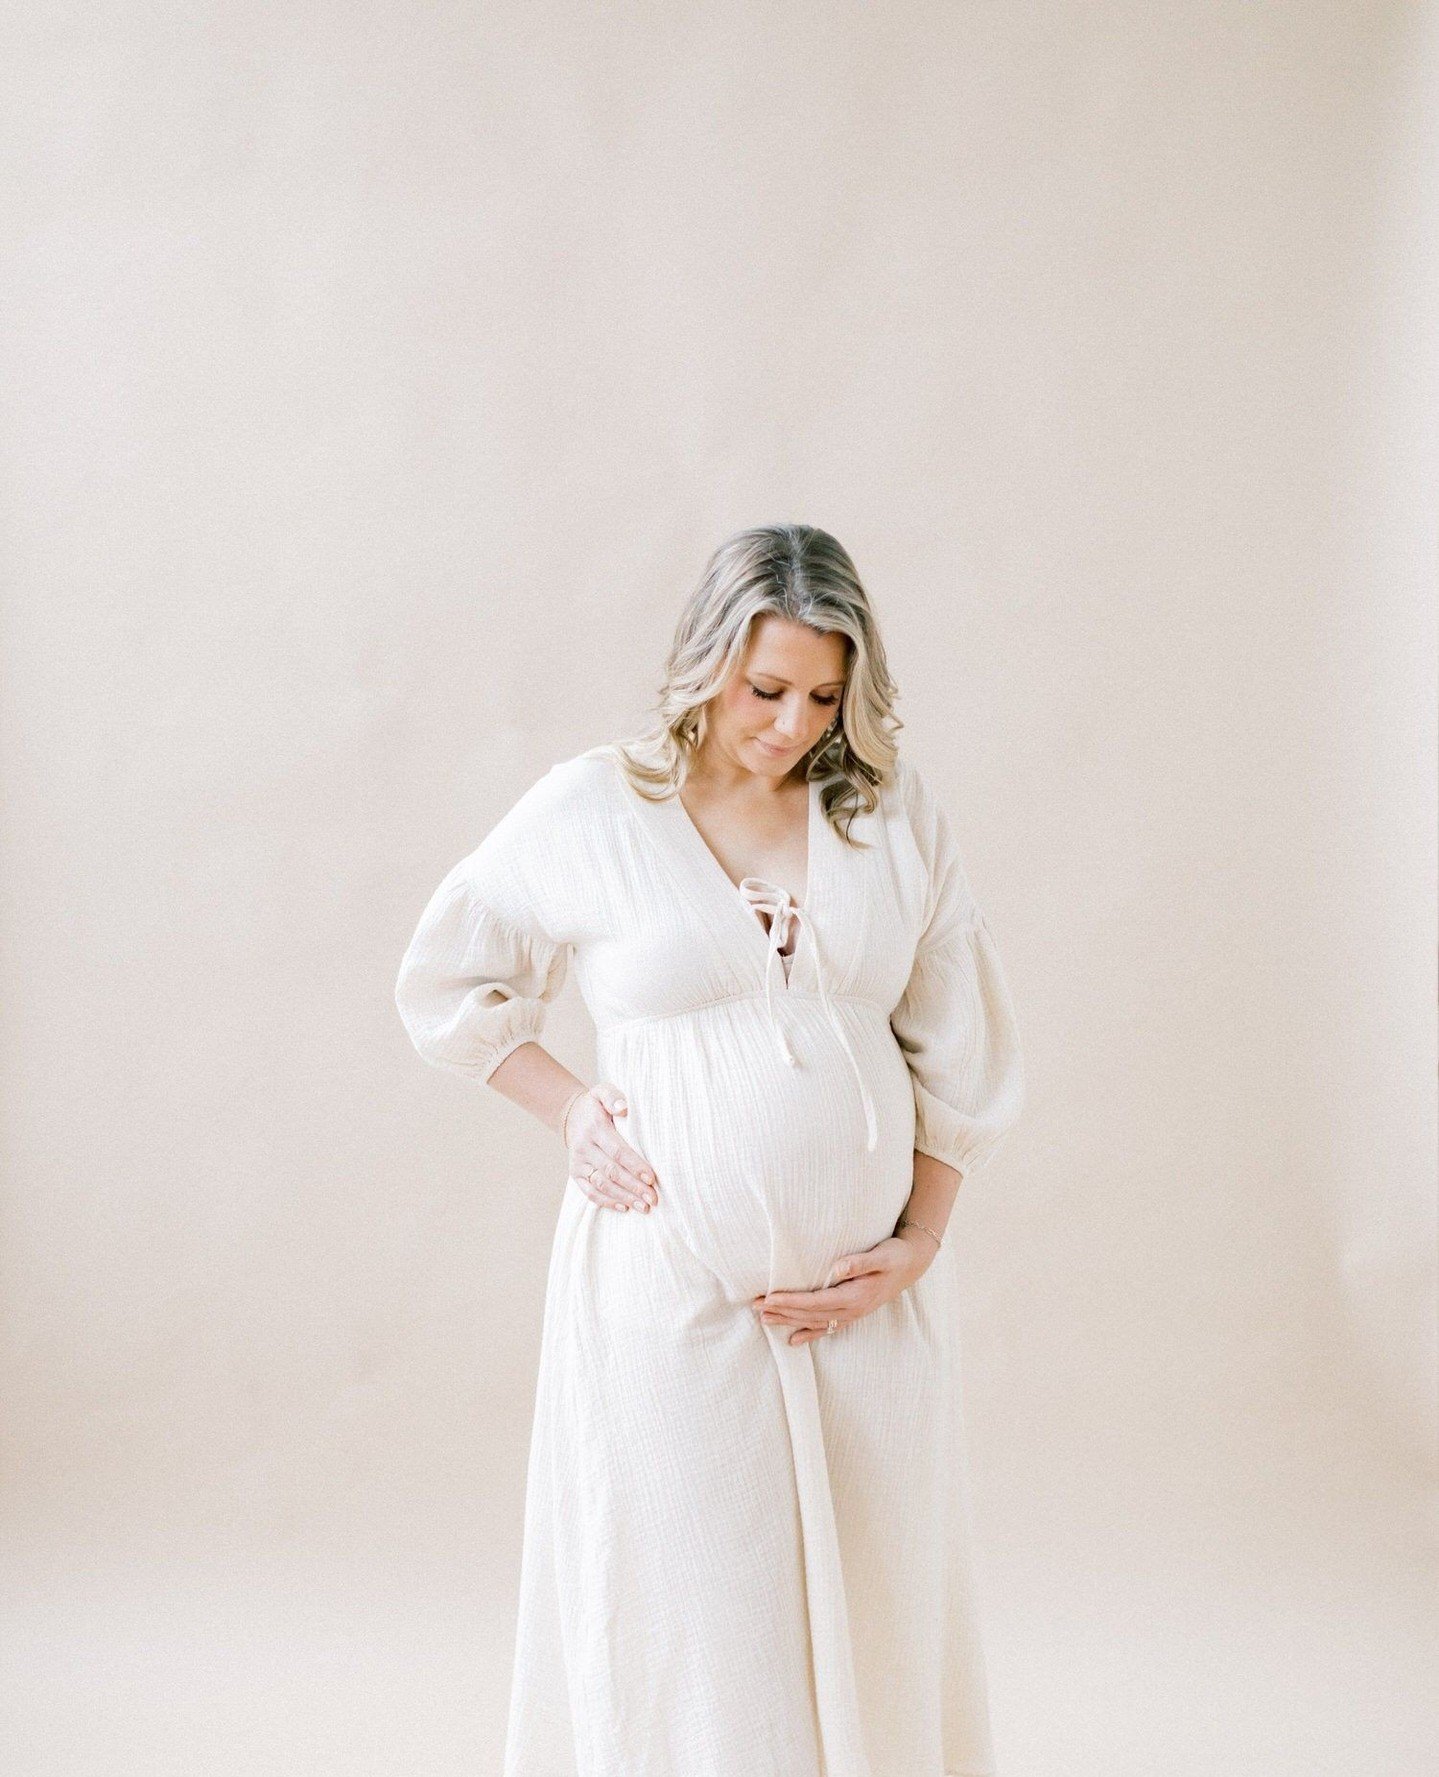 a sunday kind of love 🤍⁠
⁠
⁠
⁠
⁠
⁠
⁠
⁠
⁠
Connecticut film photographer | motherhood photography | motherhood on film | Connecticut motherhood photographer | maternity photography | Connecticut maternity photographer | Connecticut family photographer